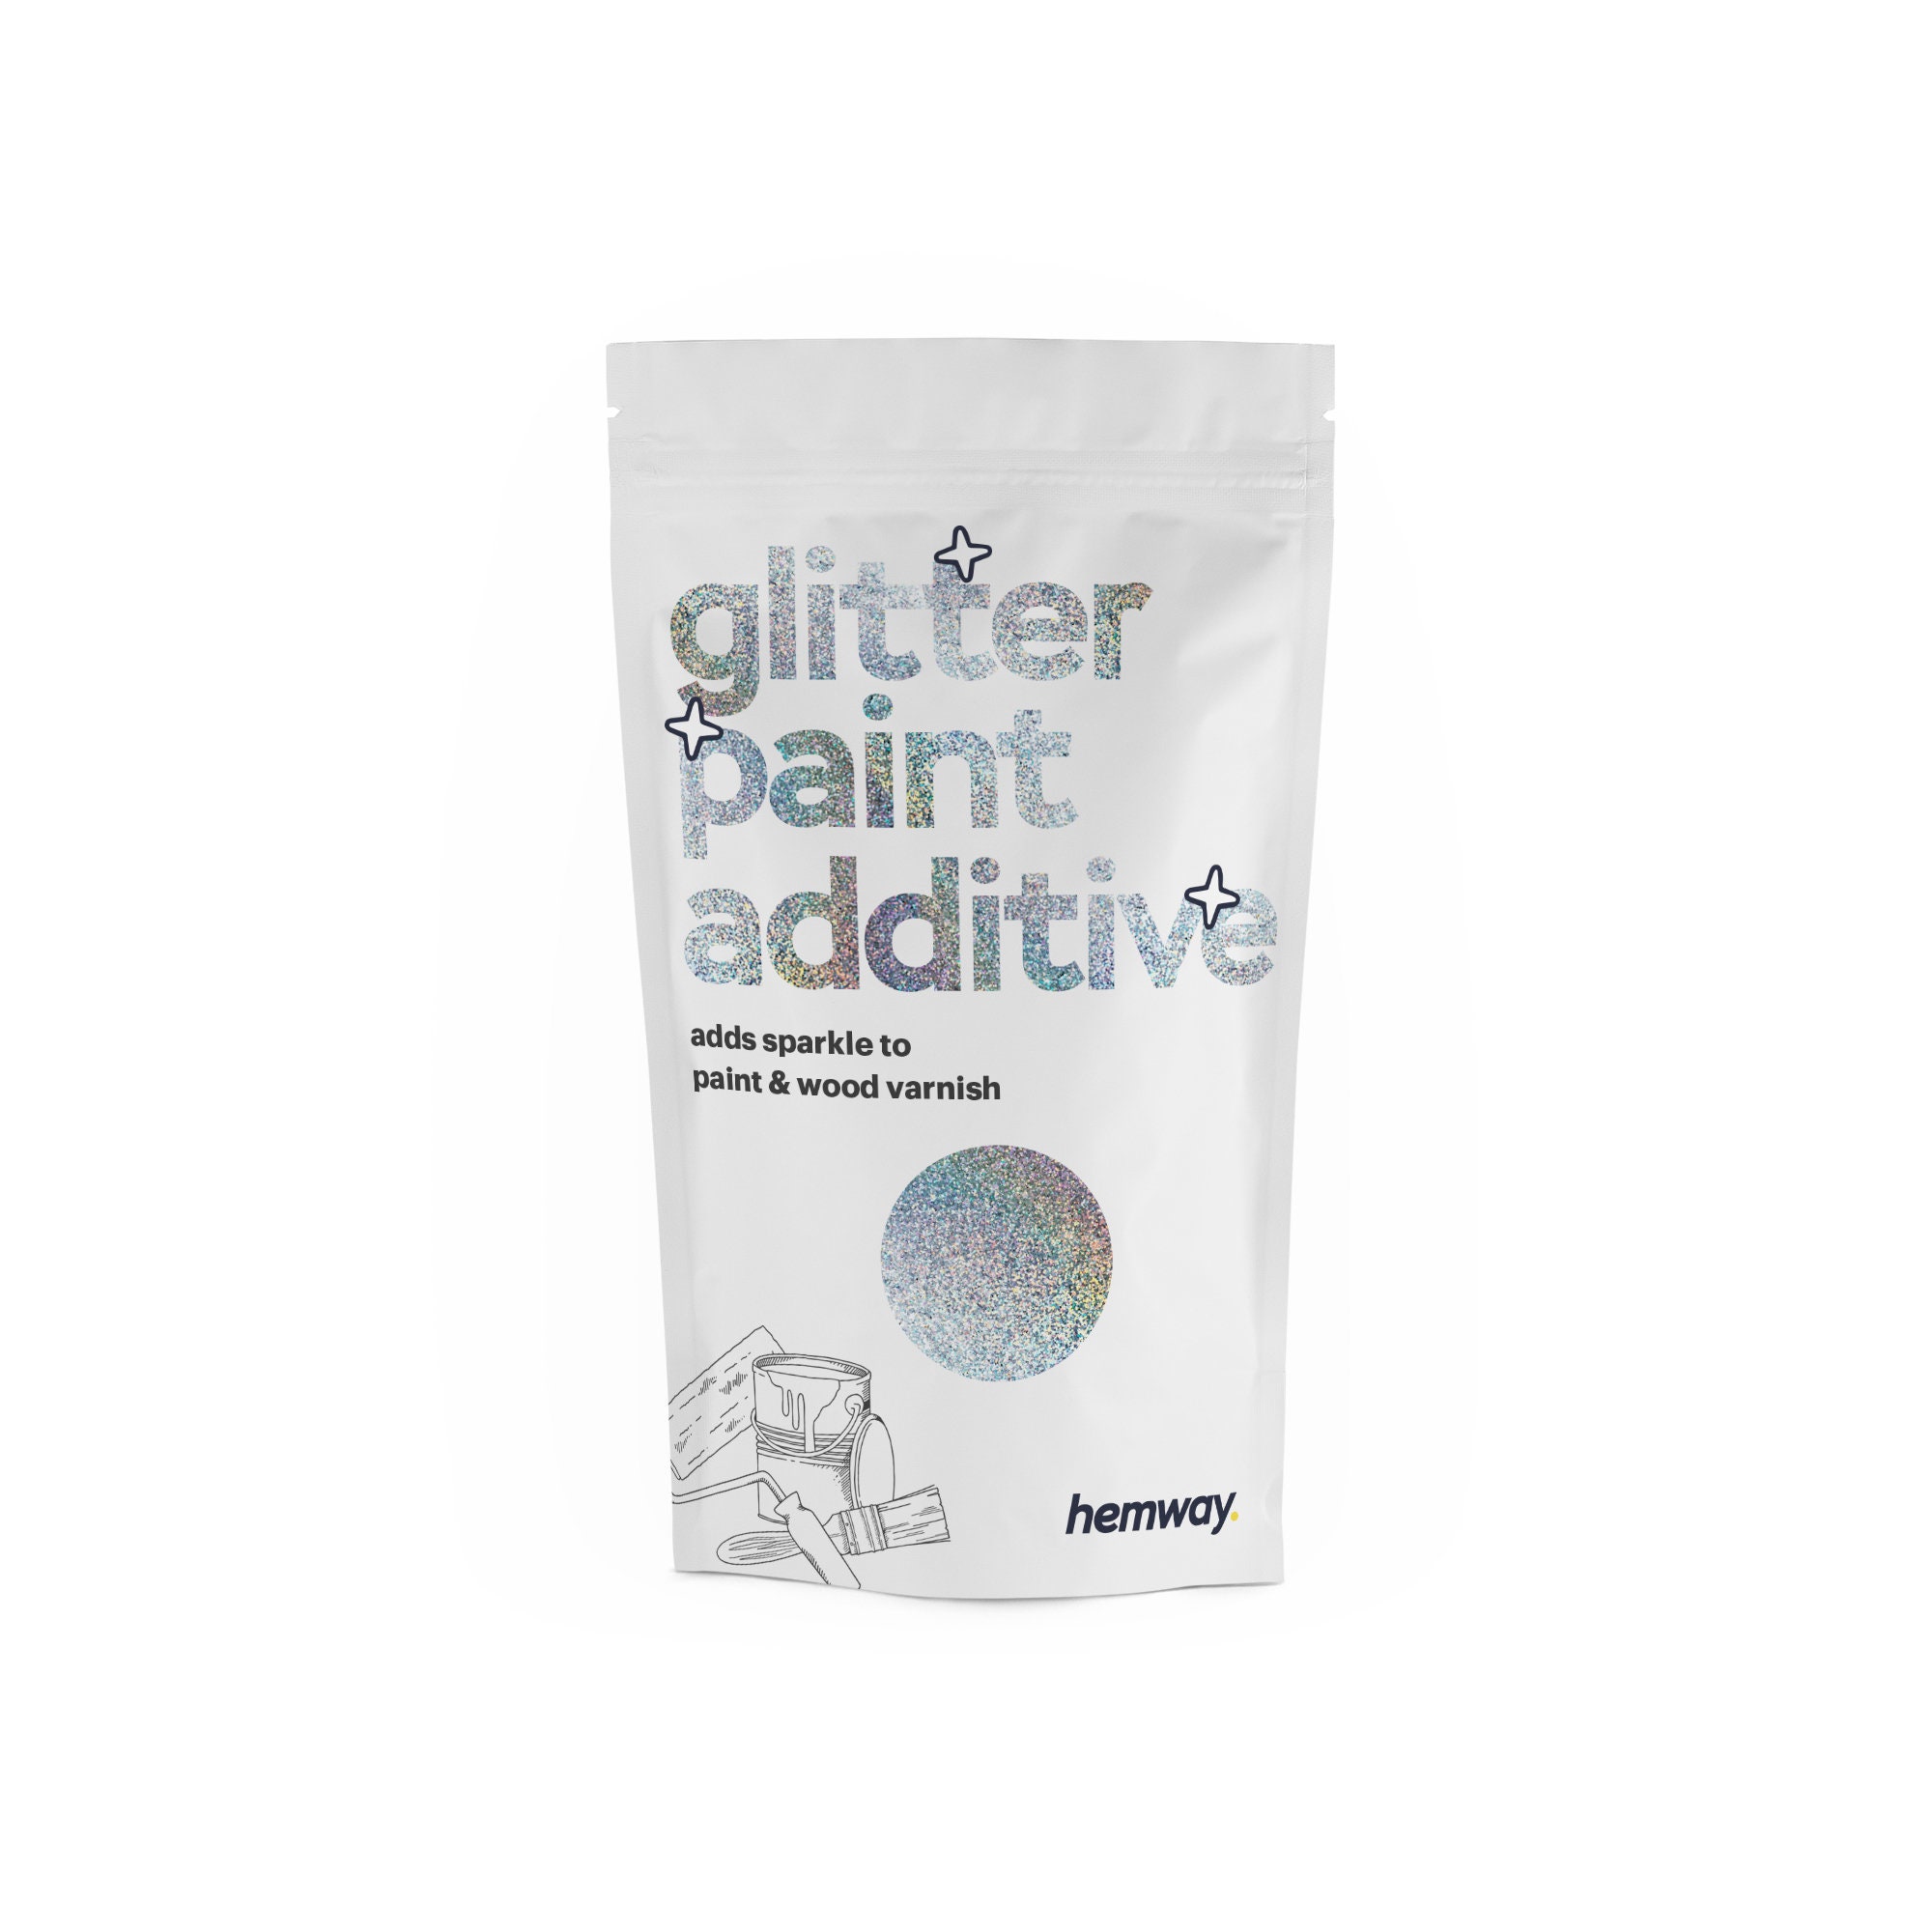 FINE SILVER GLITTER ADDITIVE FOR WALLS - ADD TO PAINT - 100g